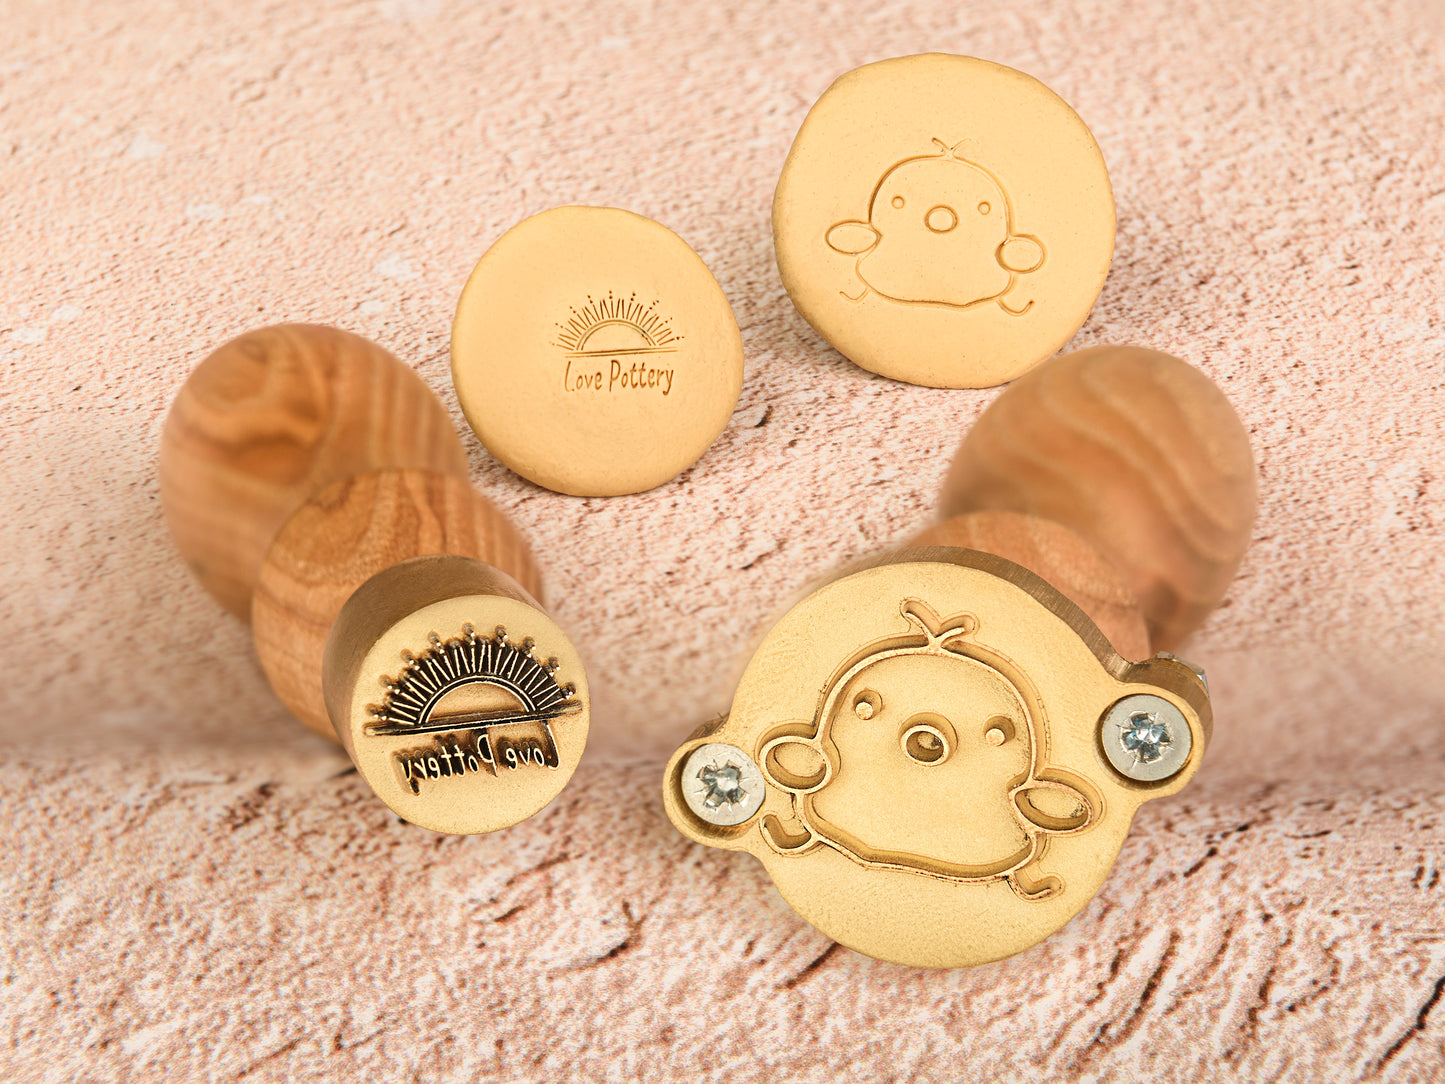 A Custom Engraved 4 inch Metal (Brass) Stamp for Clay - Claystamps